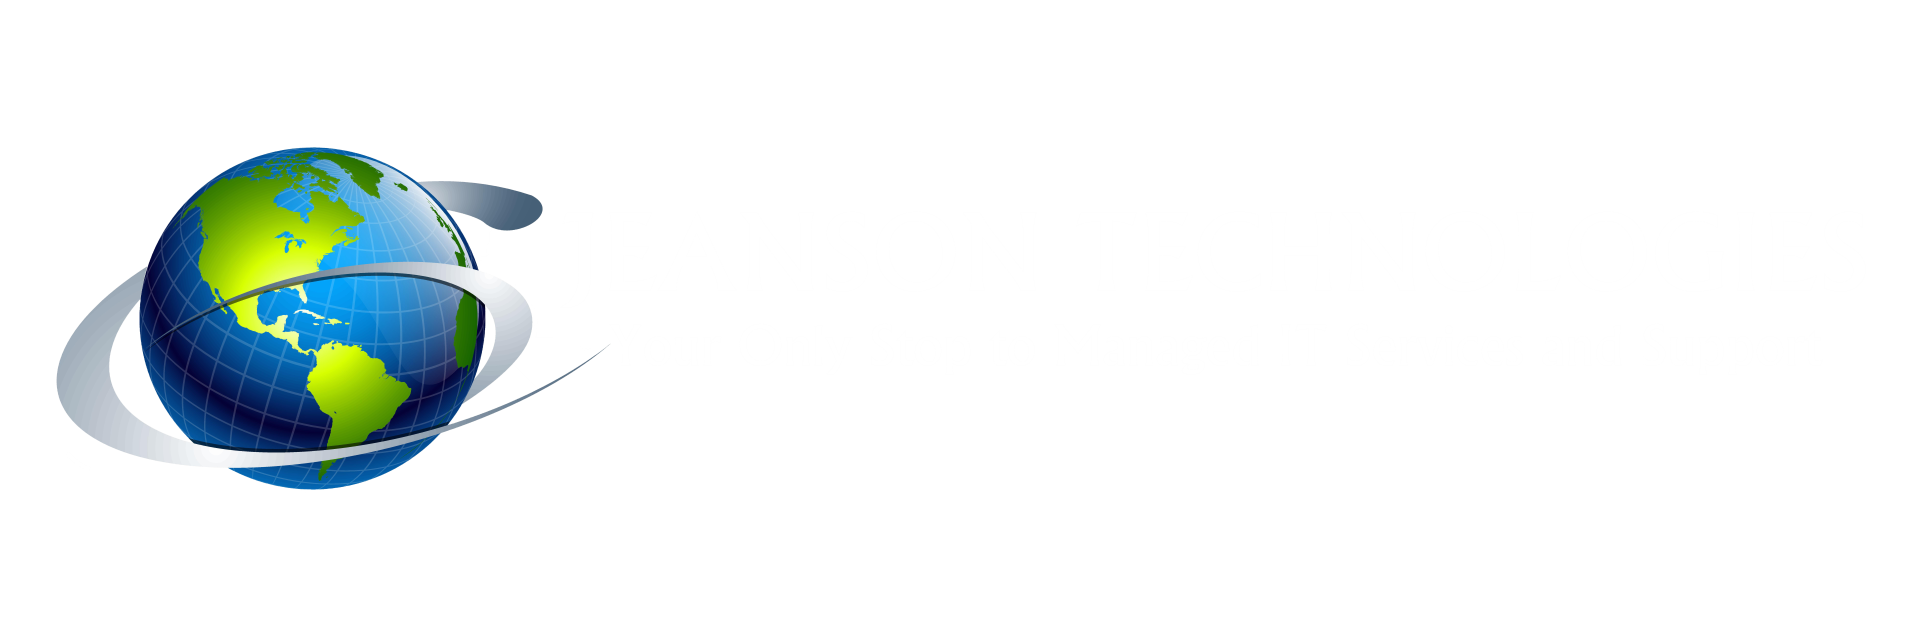 Jeanson Technologies Footer